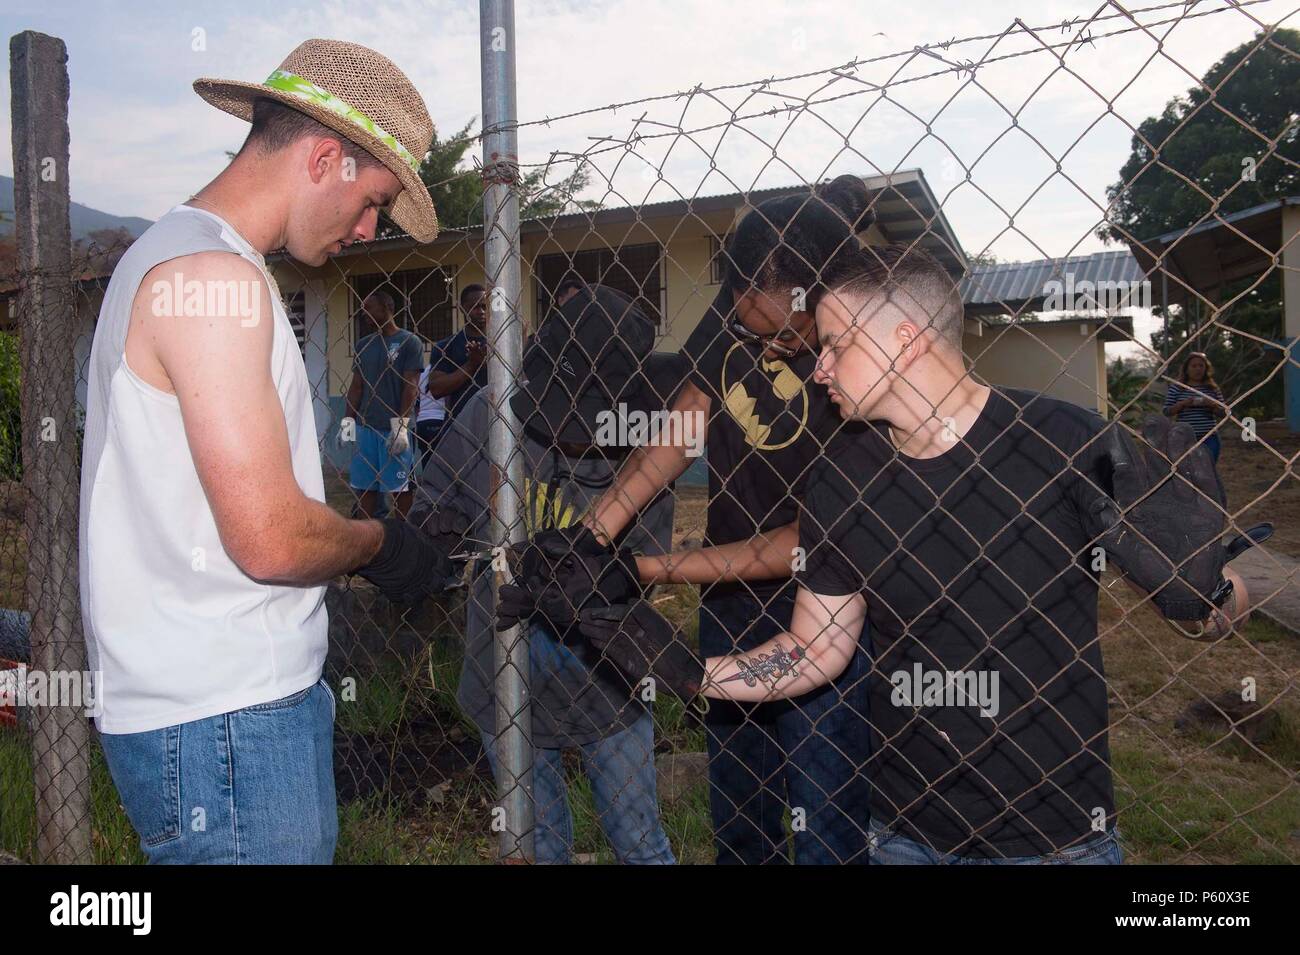 160402-N-MD297-002 VERACRUZ, Panama (April 2, 2016) Sailors from the Arleigh Burke-class guided-missile destroyer USS Lassen (DDG 82) replace a damaged fence at the Cosecha de Amistad School in Veracruz, Panama during a community service event with members of PanamaÕs Presidential Protective Service (SPI). Lassen is currently underway in support of Operation Martillo, a joint operation with the U.S. Coast Guard and partner nations within the 4th Fleet area of responsibility. Operation Martillo is being led by Joint Interagency Task Force South, in support of U.S. Southern Command. (U.S. Navy p Stock Photo